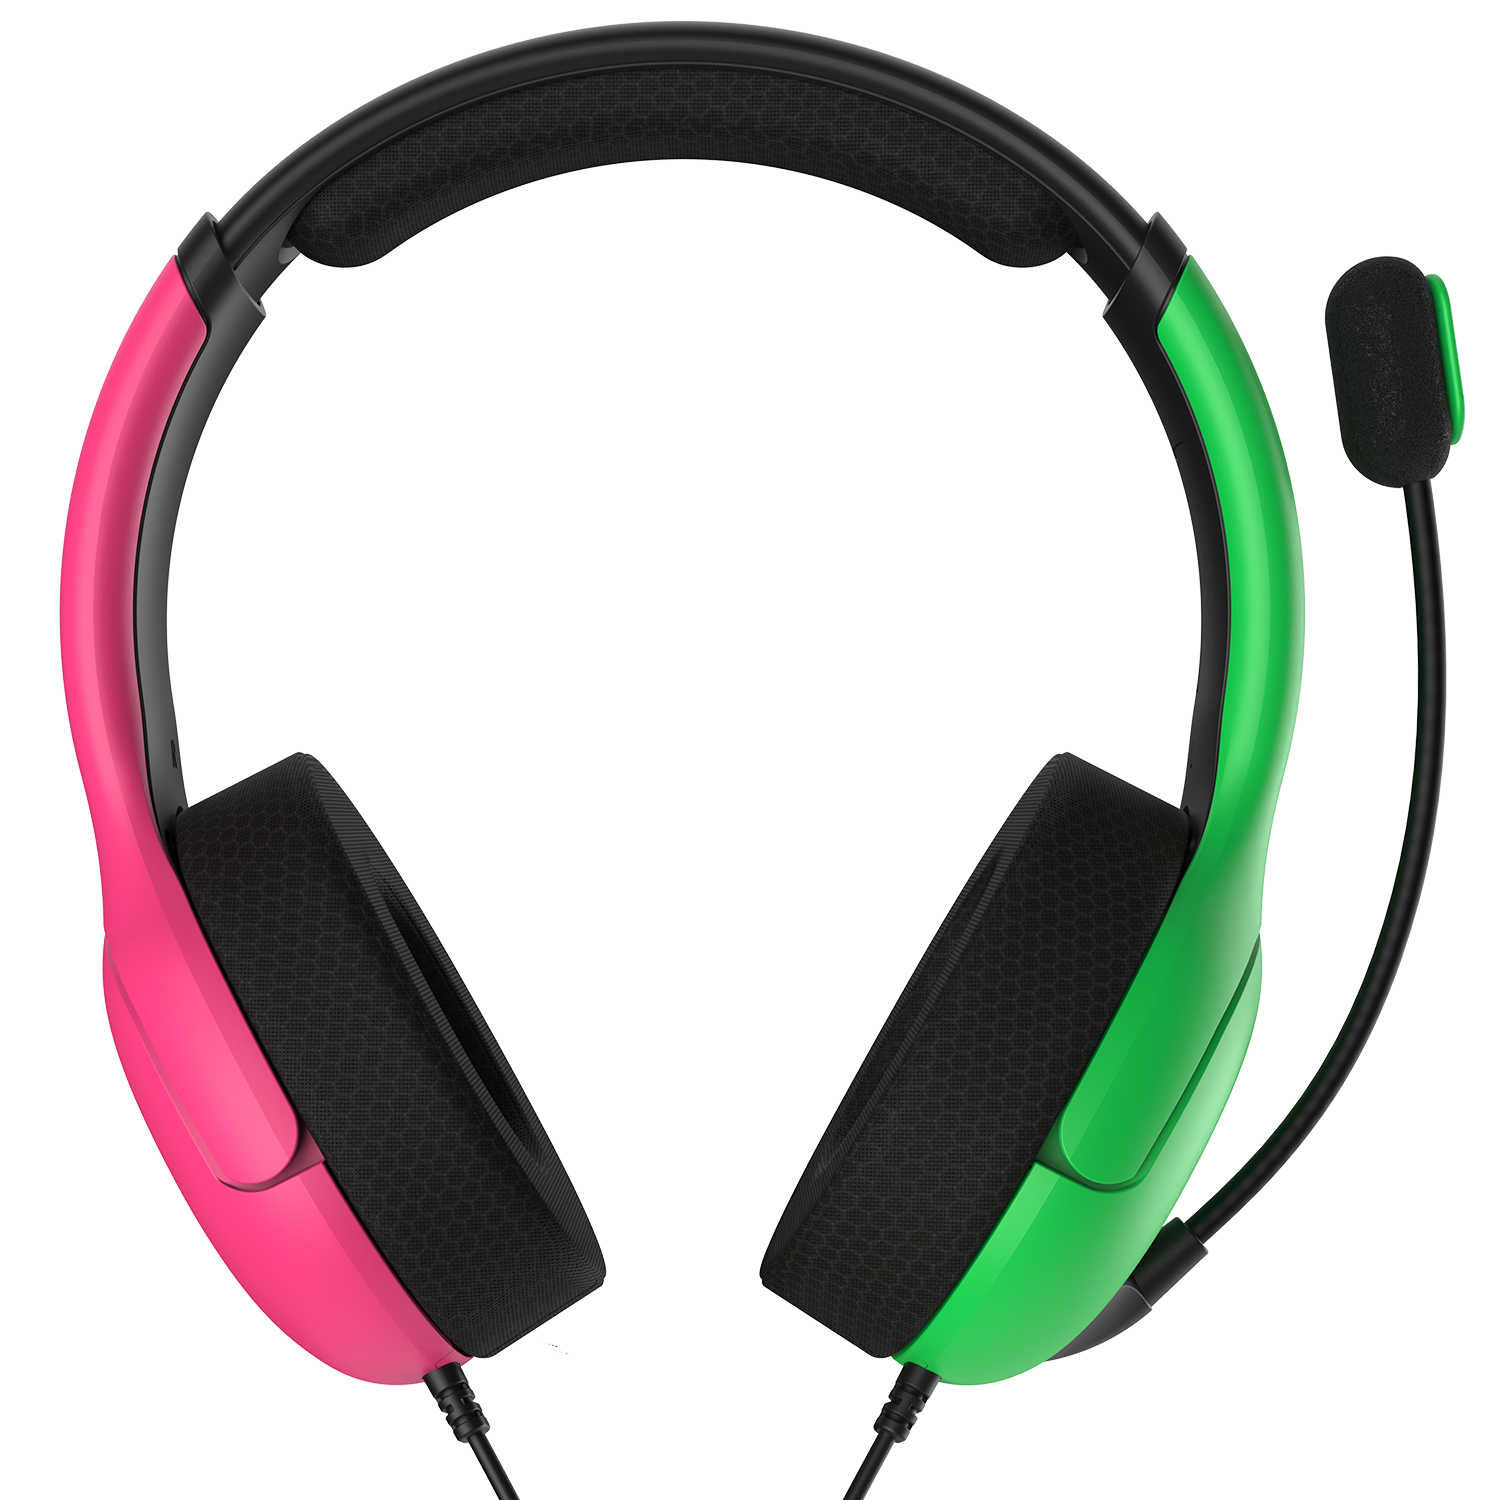 PDP 500-162-PKGR-NA LVL40 Wired Stereo Gaming Headset: Neon Splat